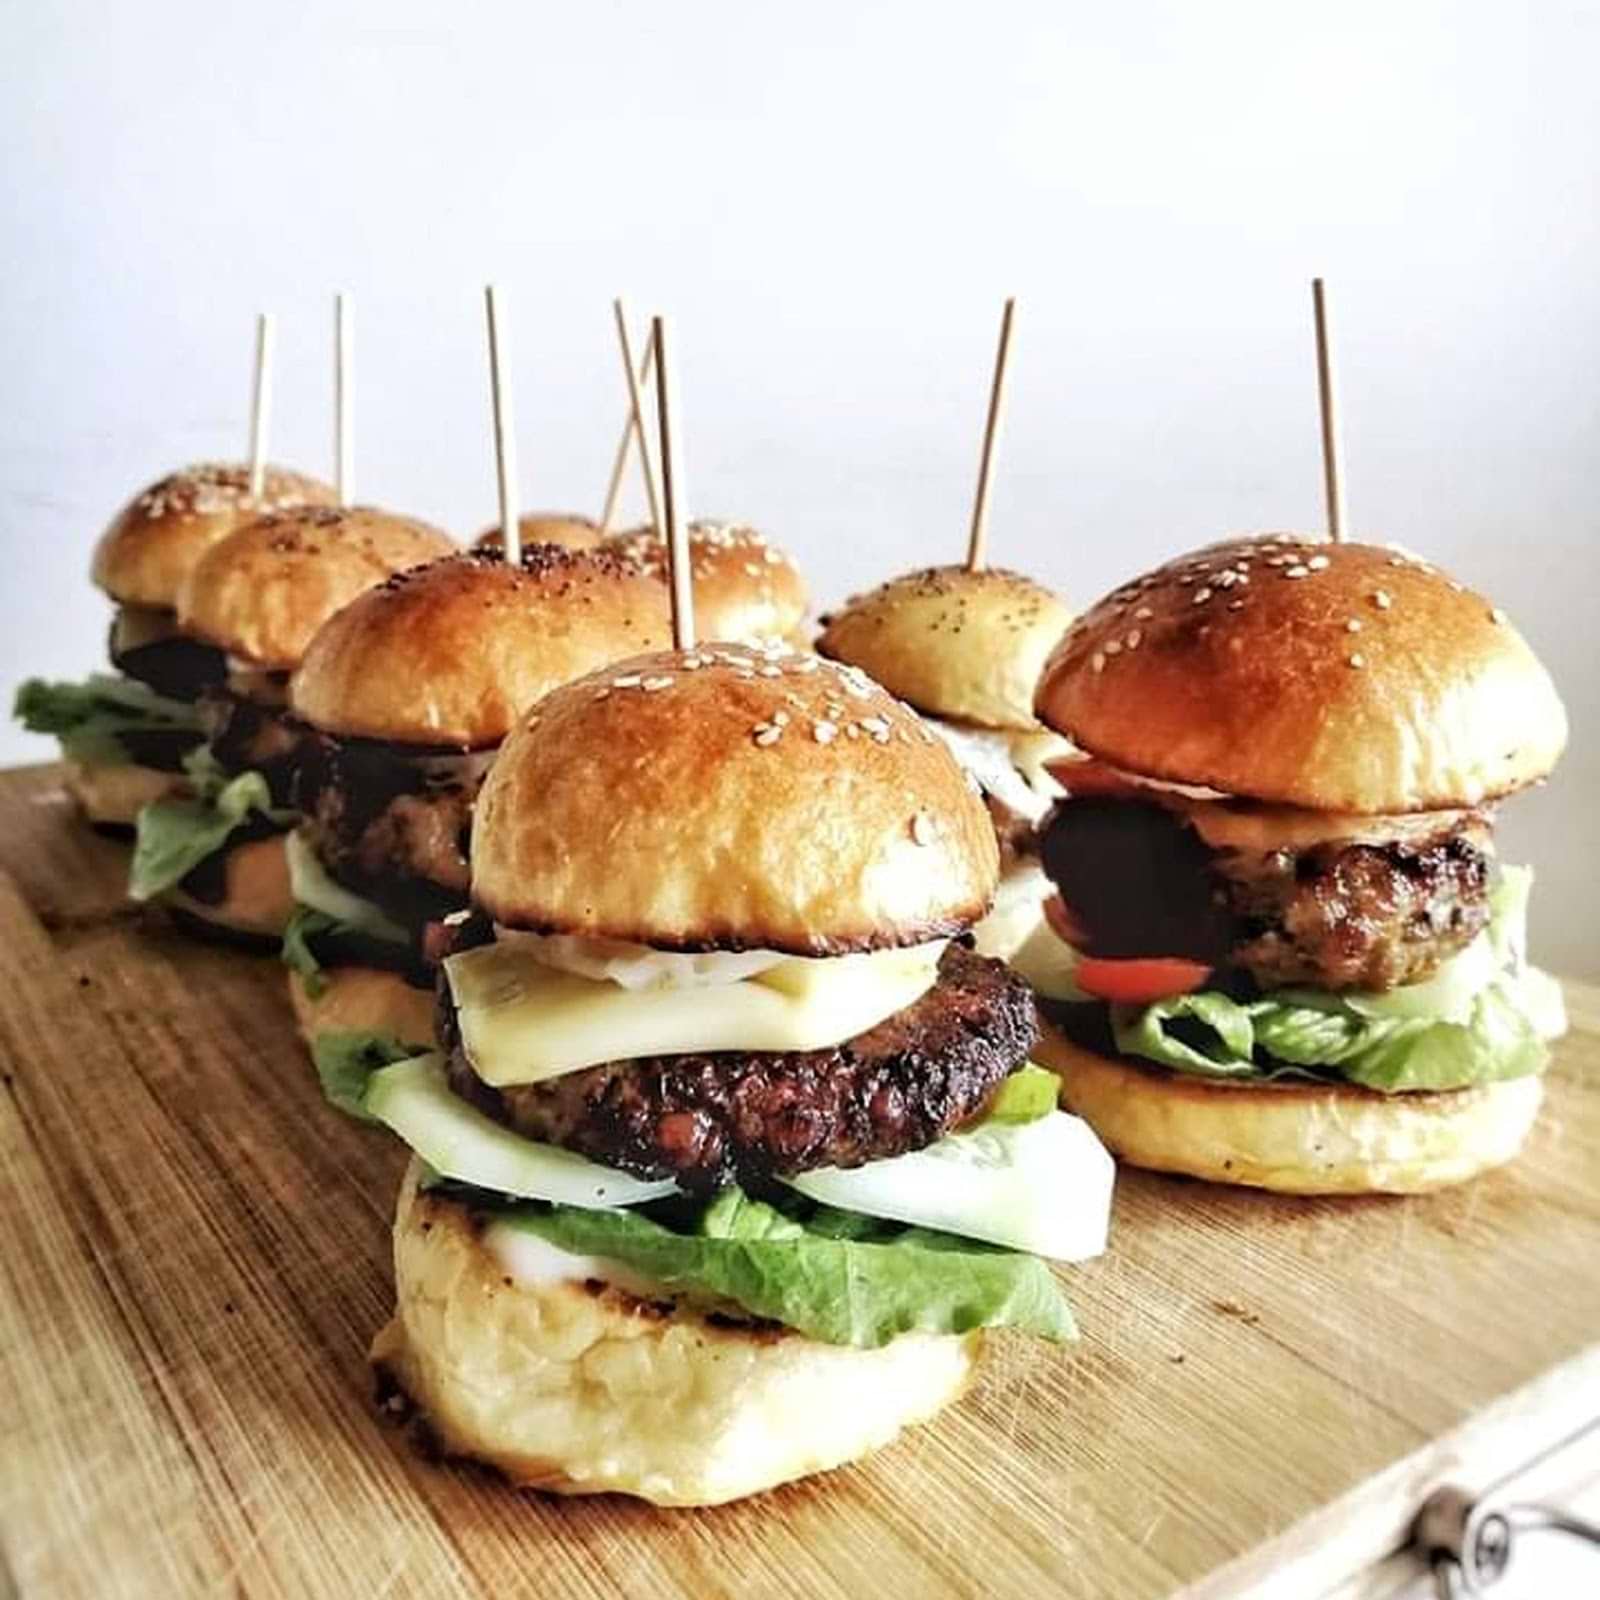 sliders being display in a wooden cutting board